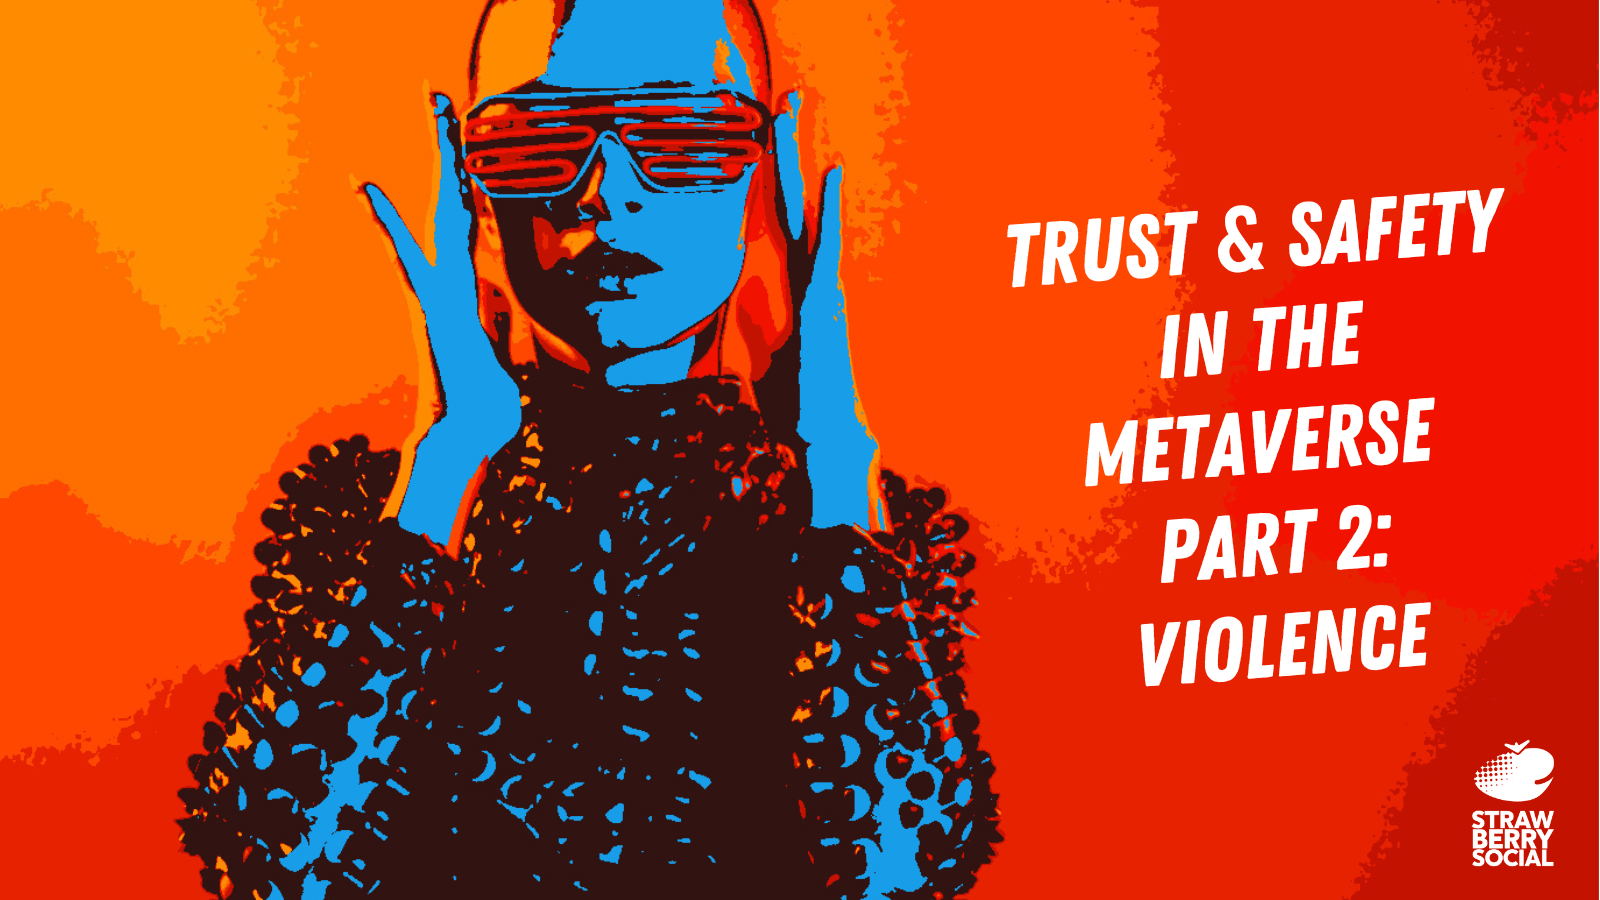 Trust and safety in the metaverse Part 2: Violence